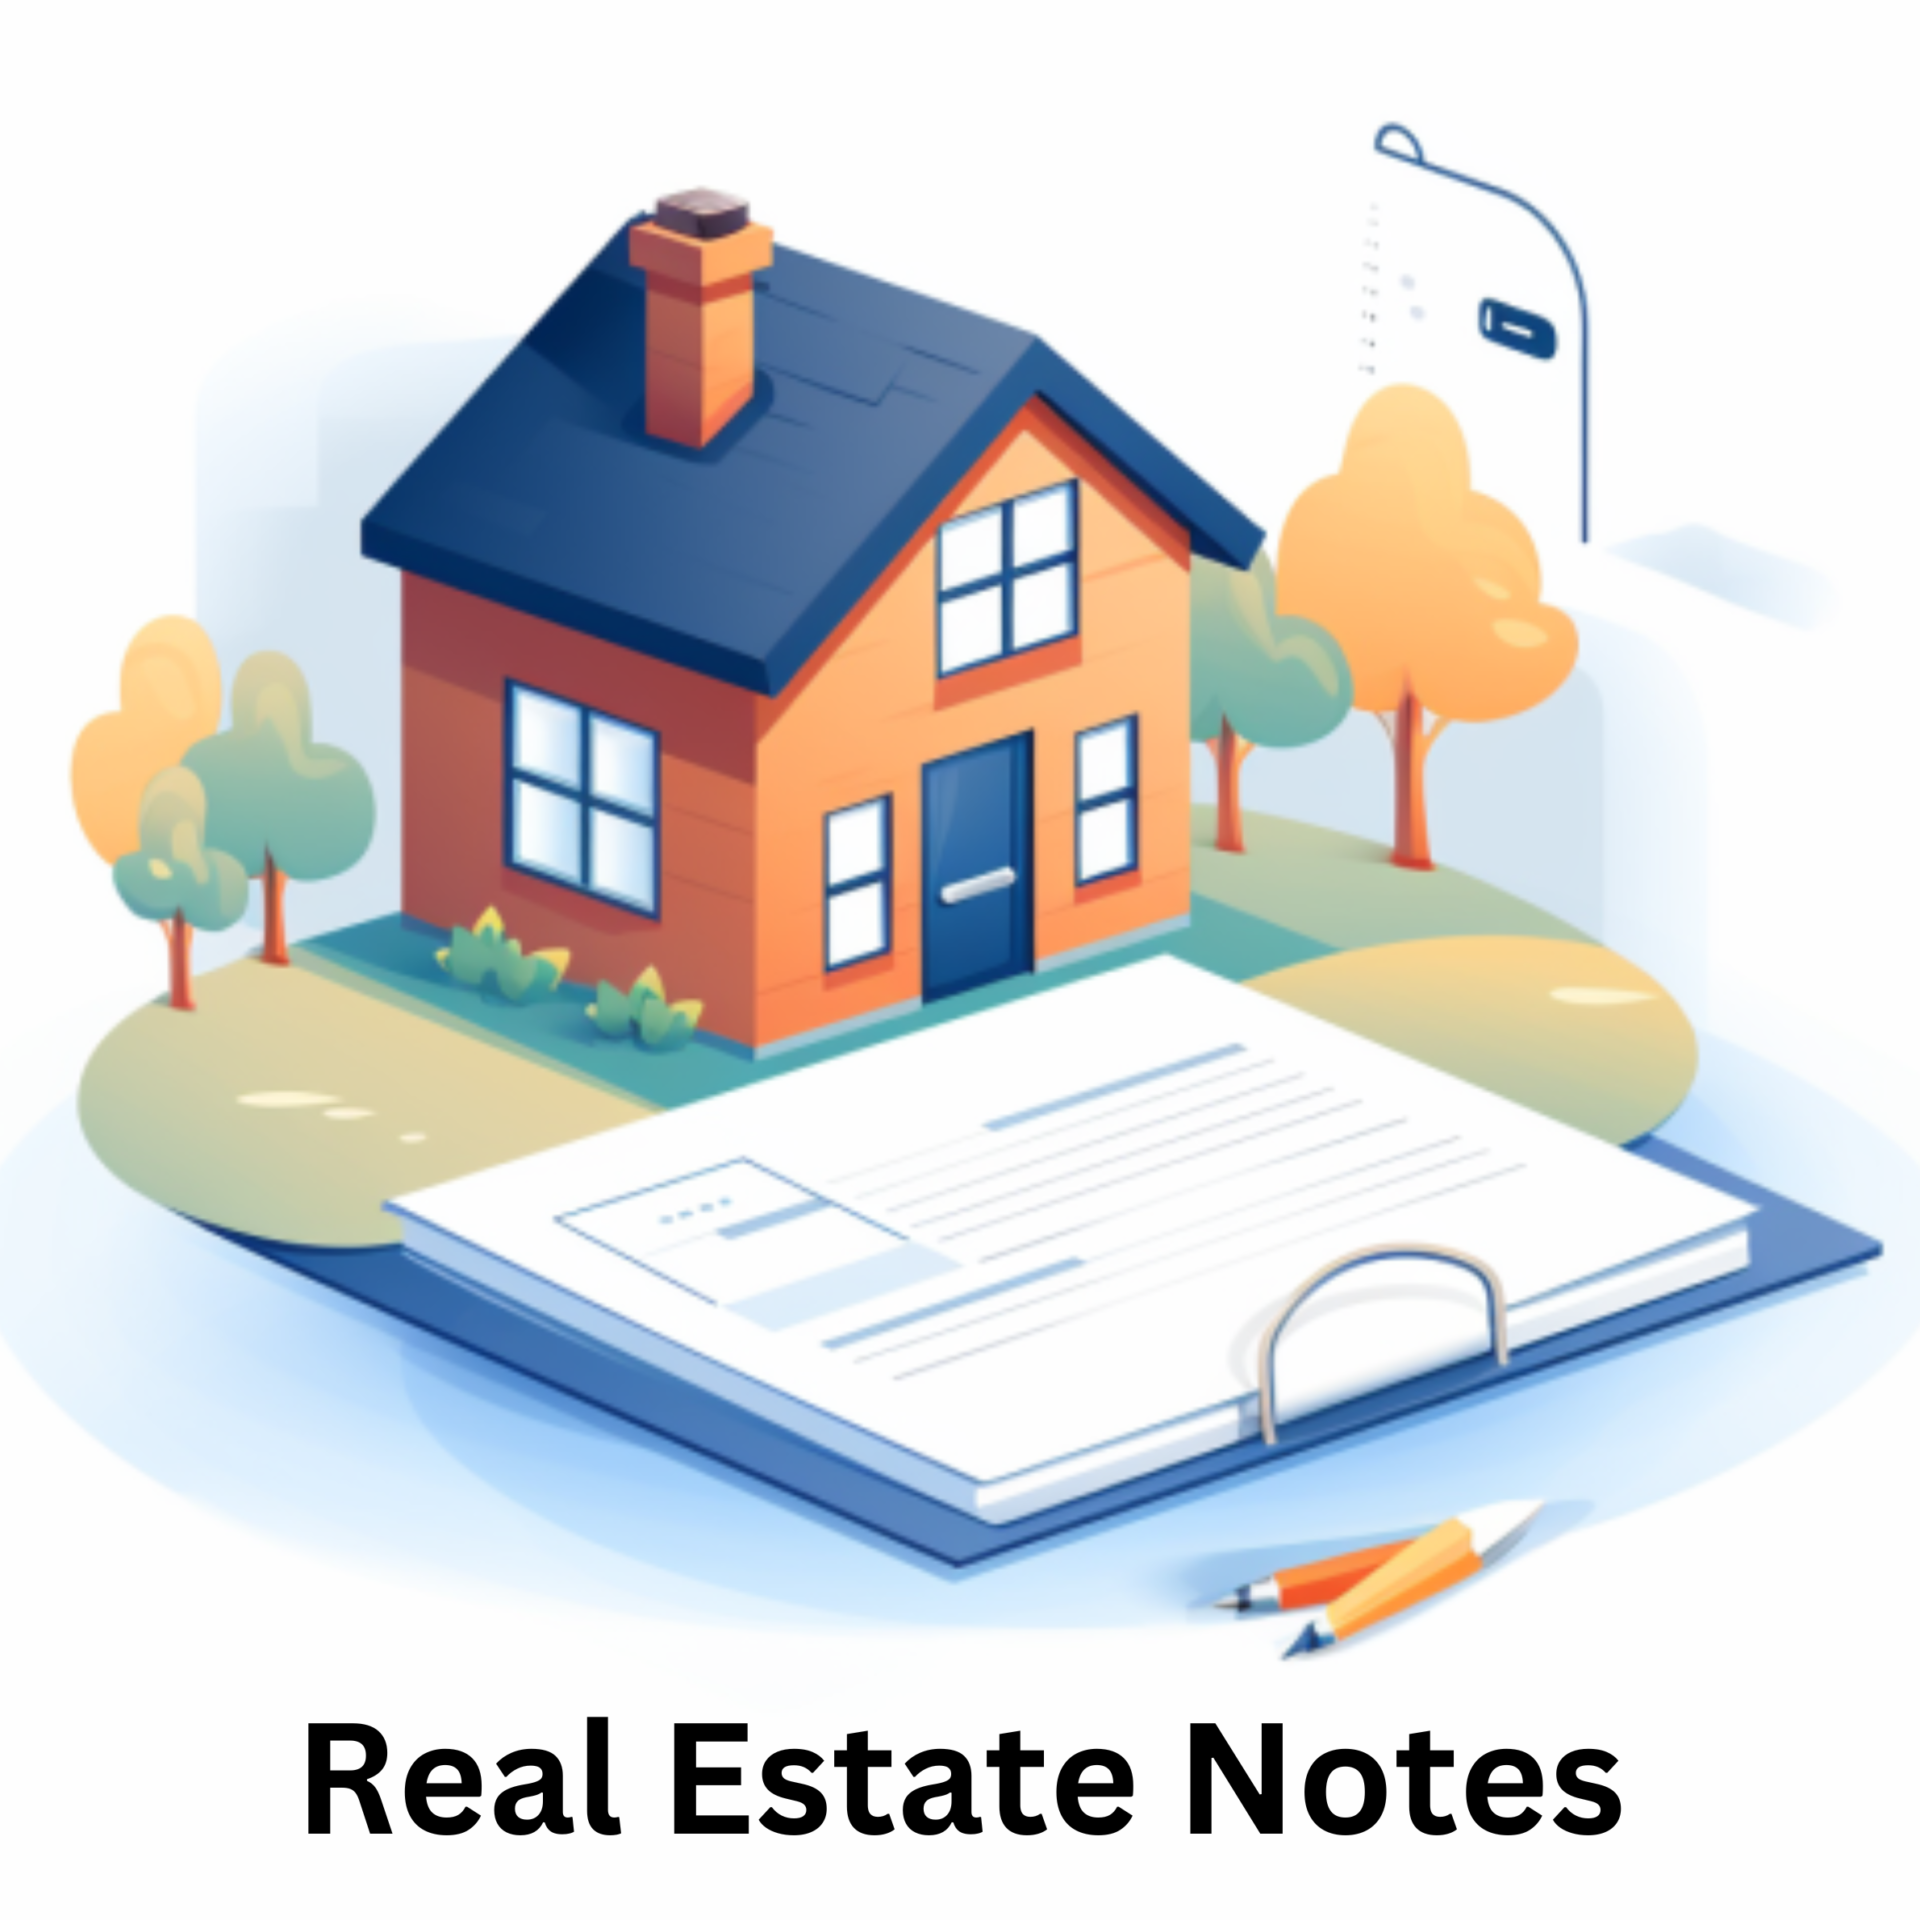 Real Estate Notes